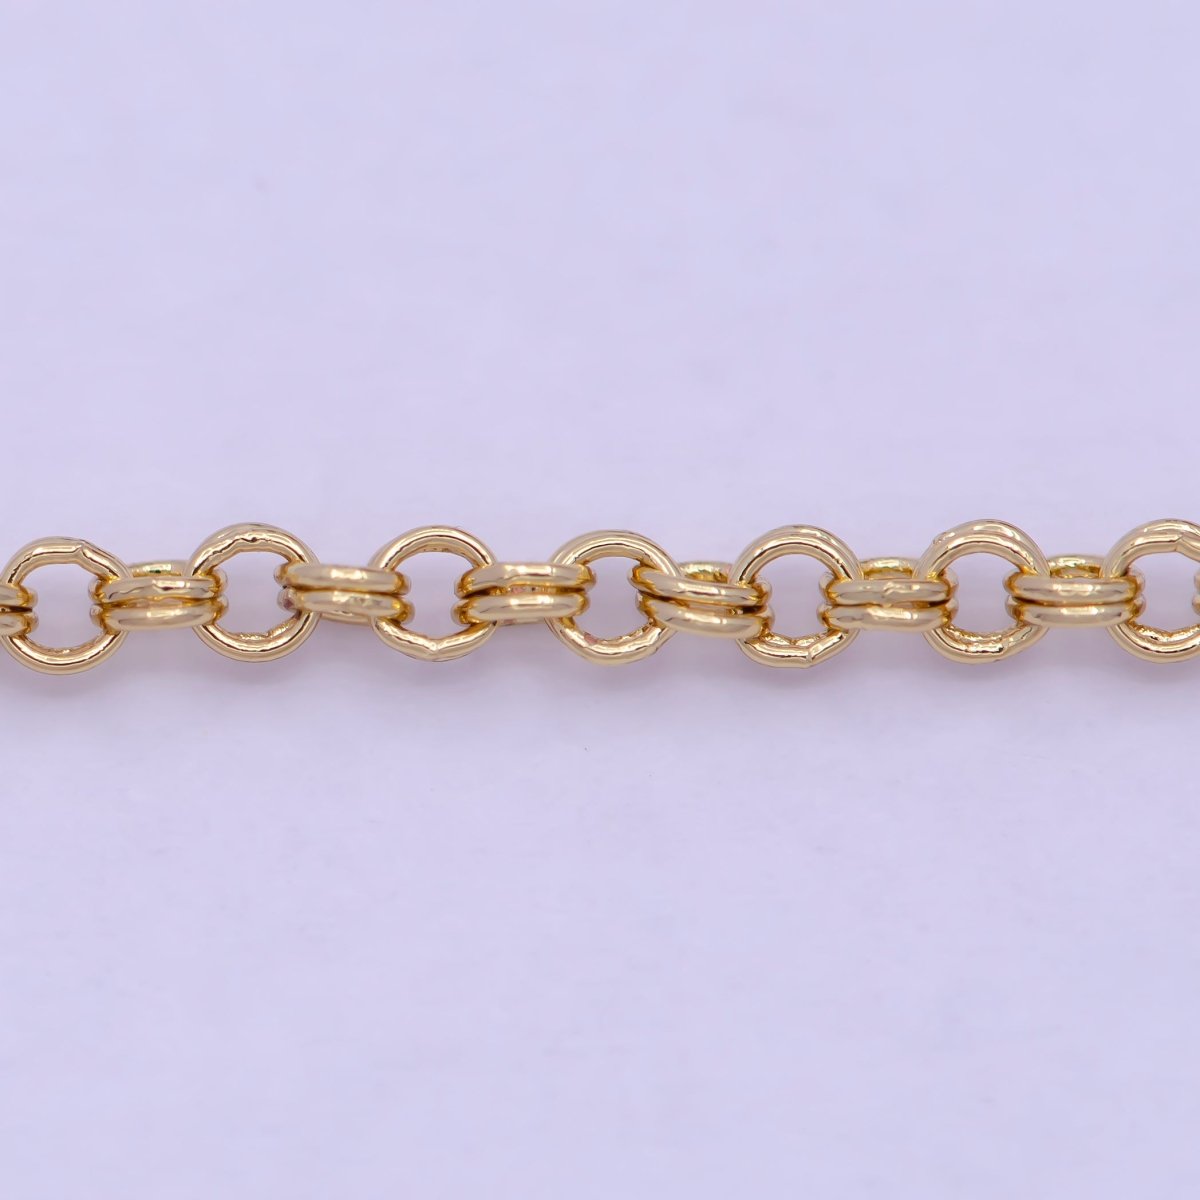 24K Gold Filled Rolo Unfinished Chain by Yard, Double Rolo Bulk Wholesale Chain For Jewelry Making | ROLL-734 Clearance Pricing - DLUXCA